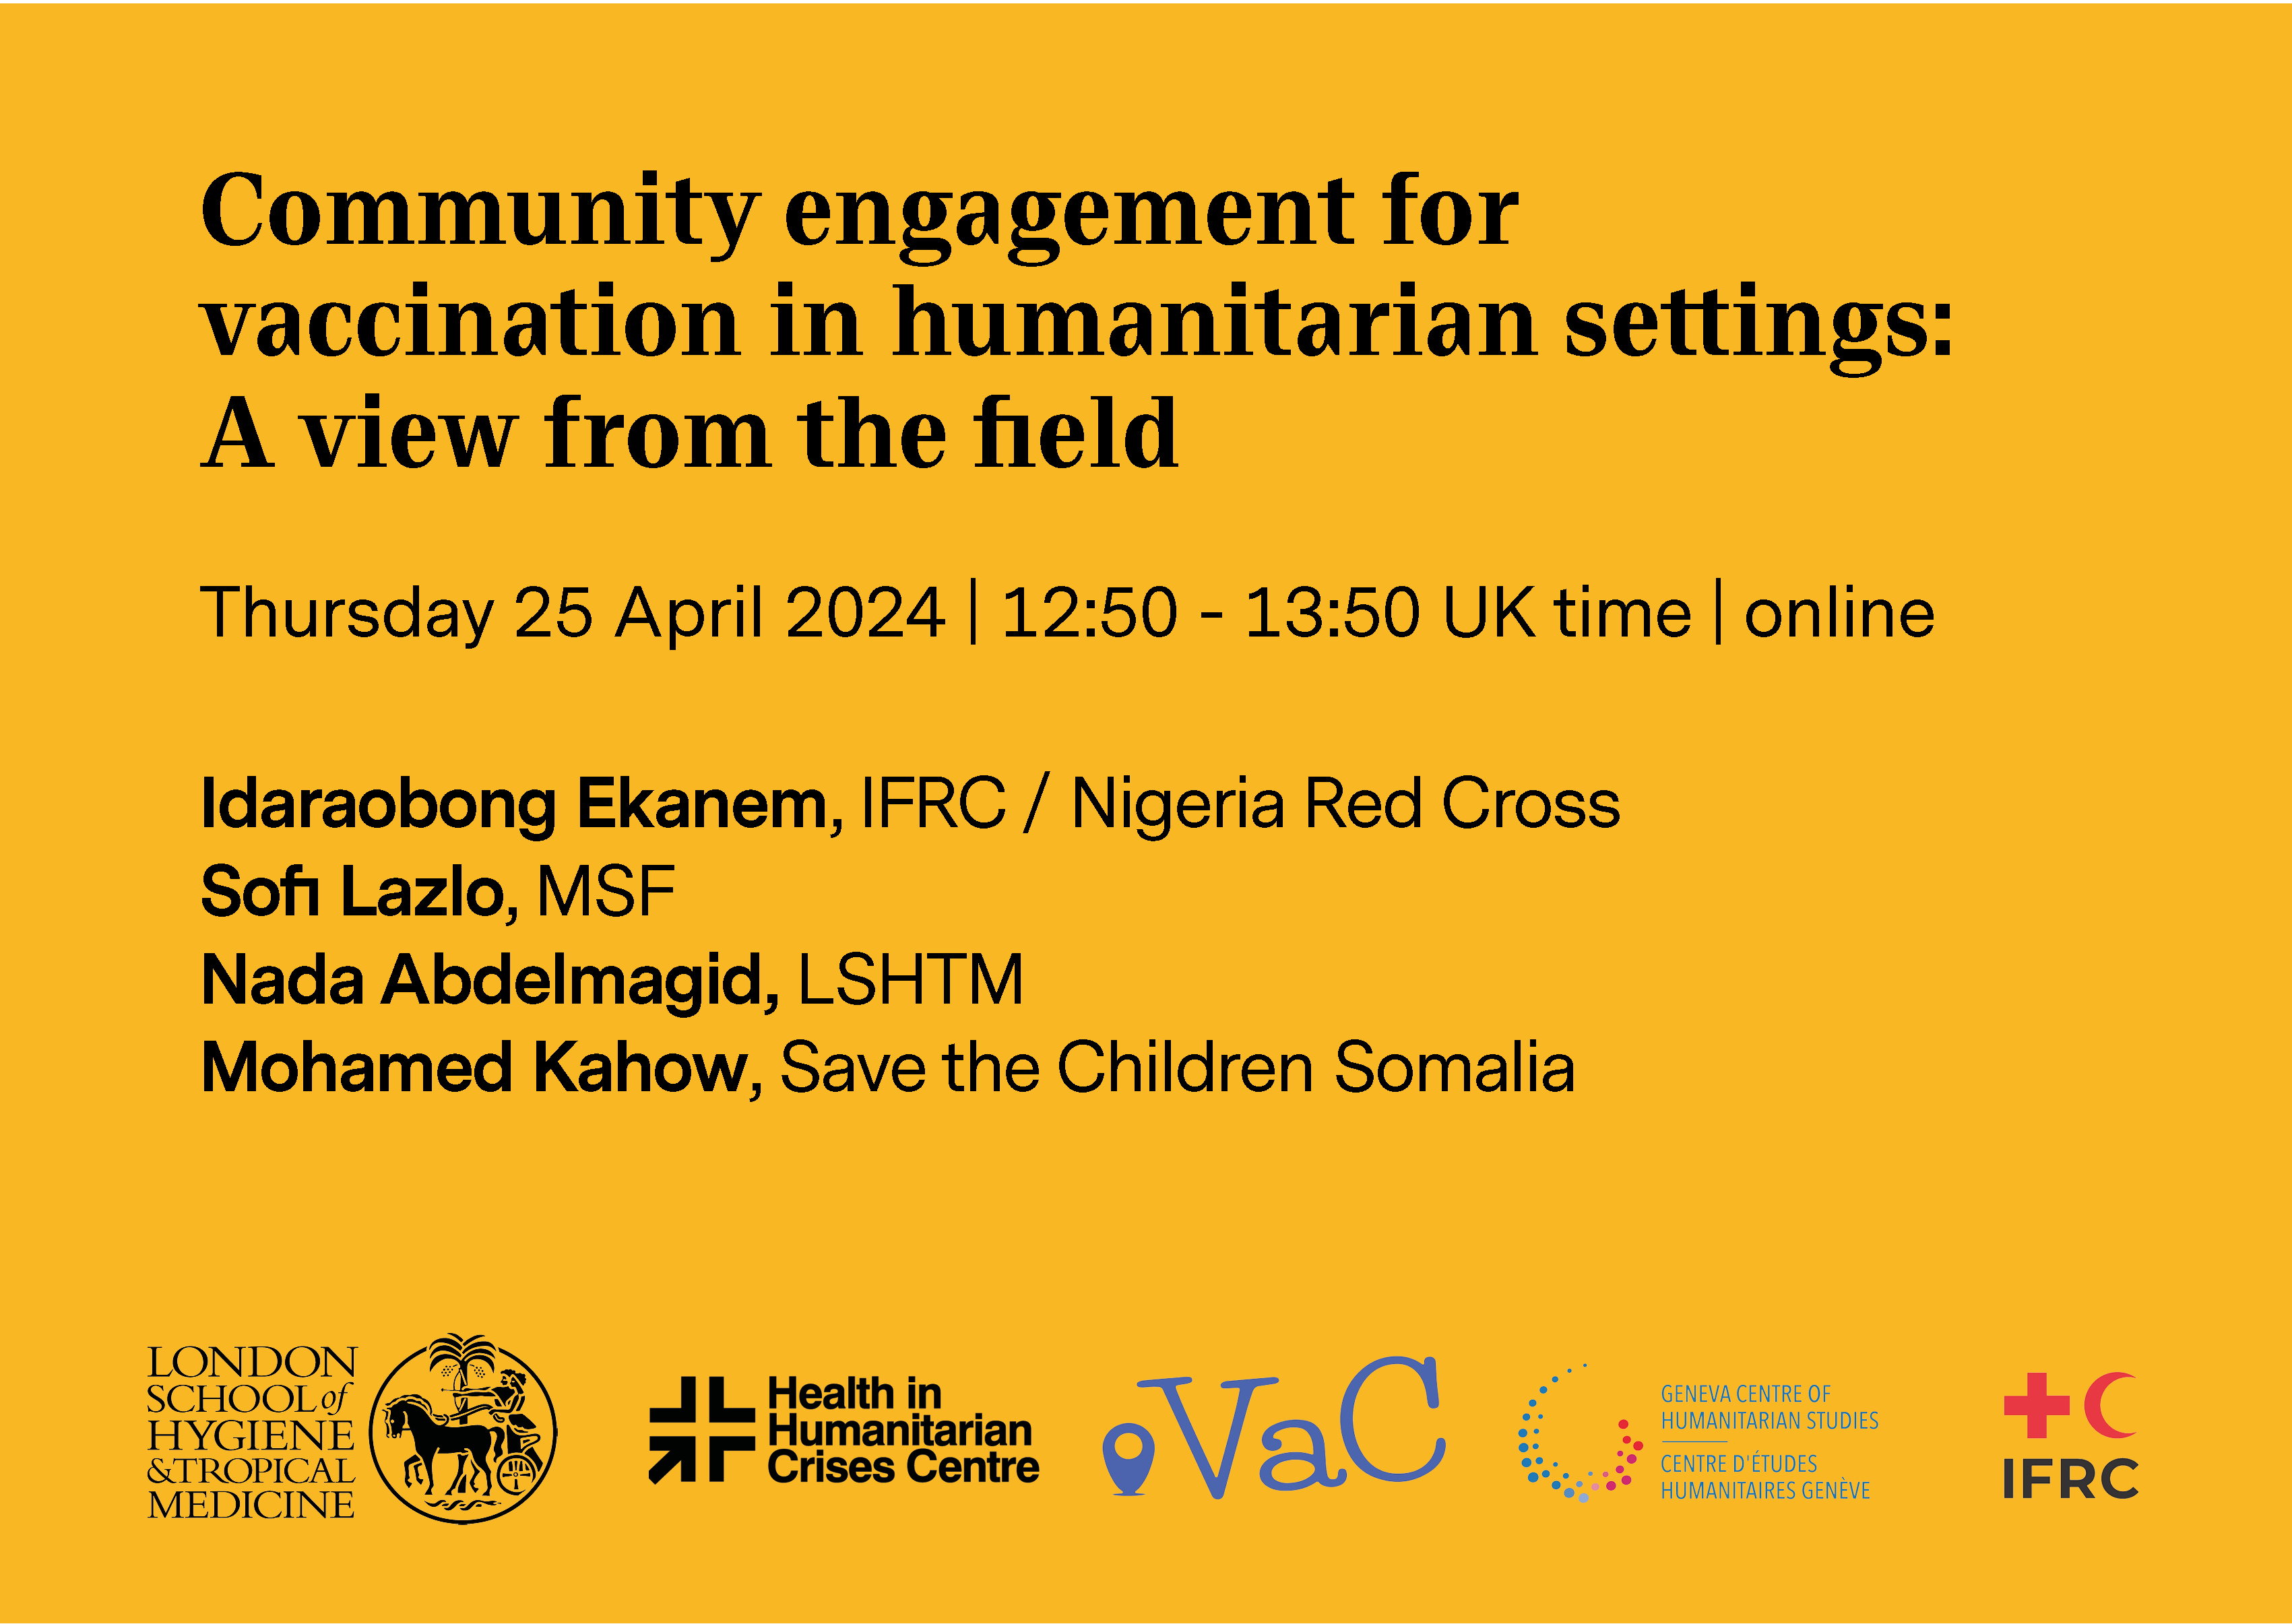 Event card for a webinar on community engagement for vaccination in humanitarian settings